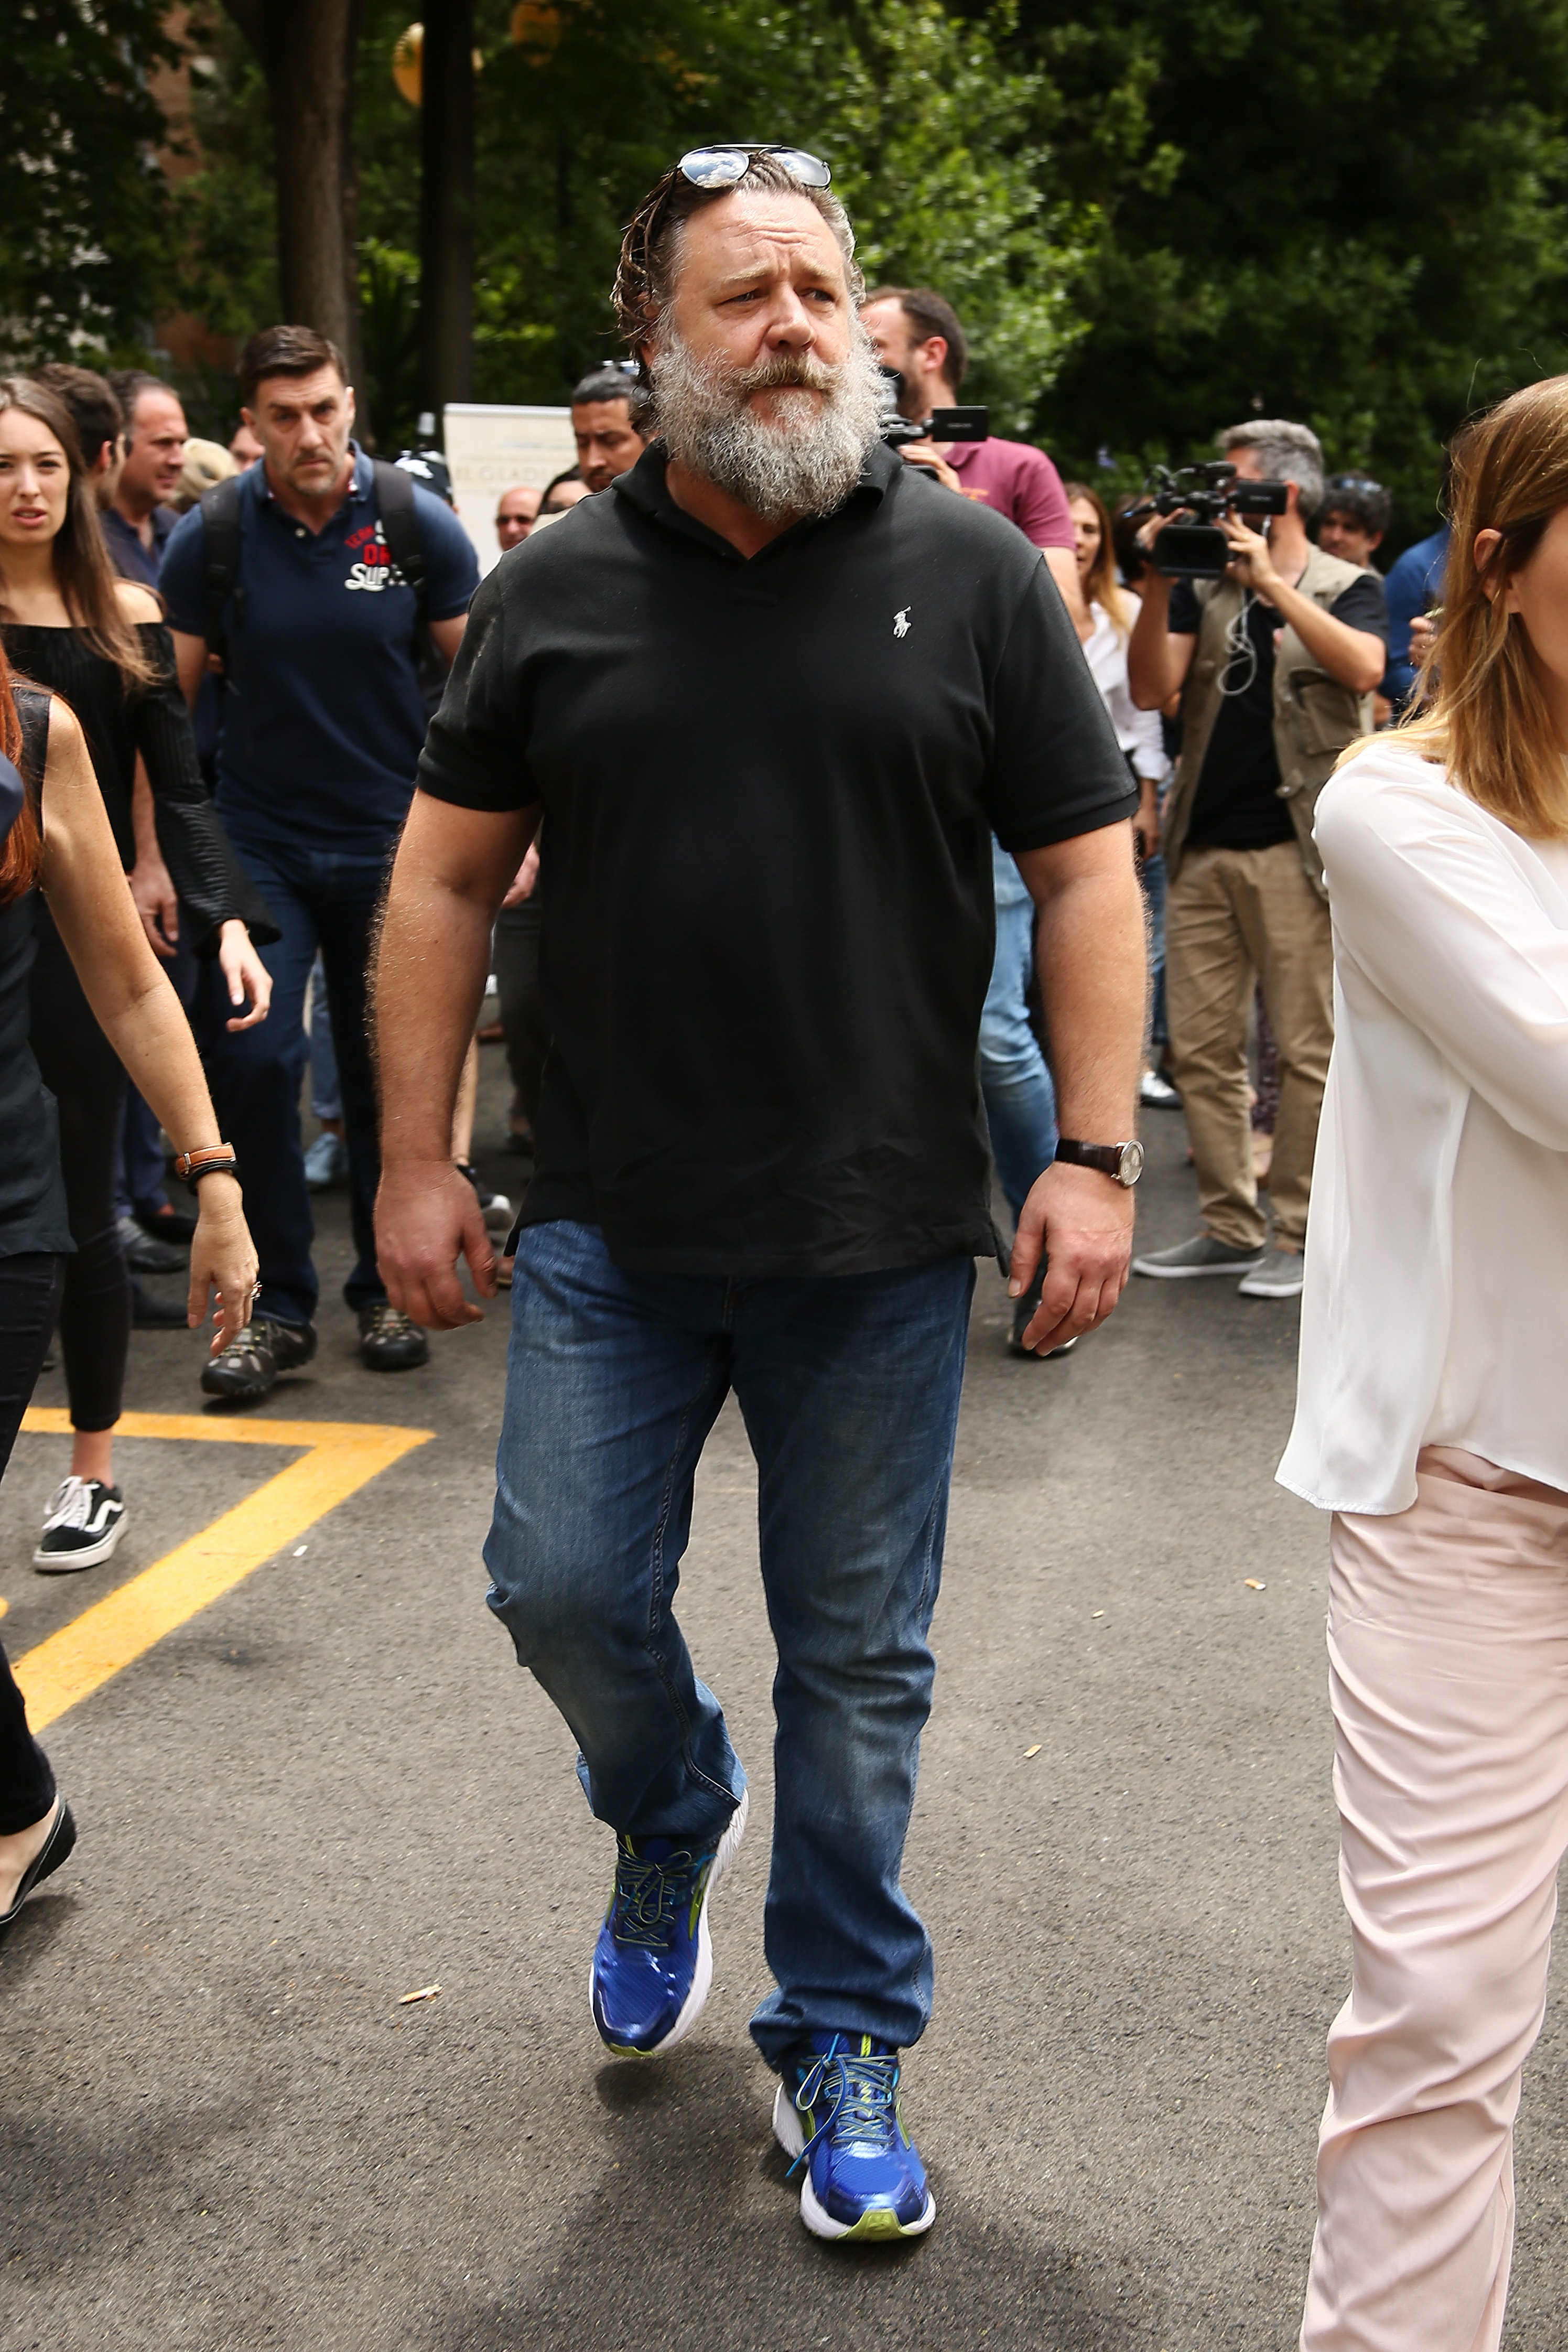 Russell Crowe am 5. Juni 2018 in Rom, Italien | Quelle: Getty Images